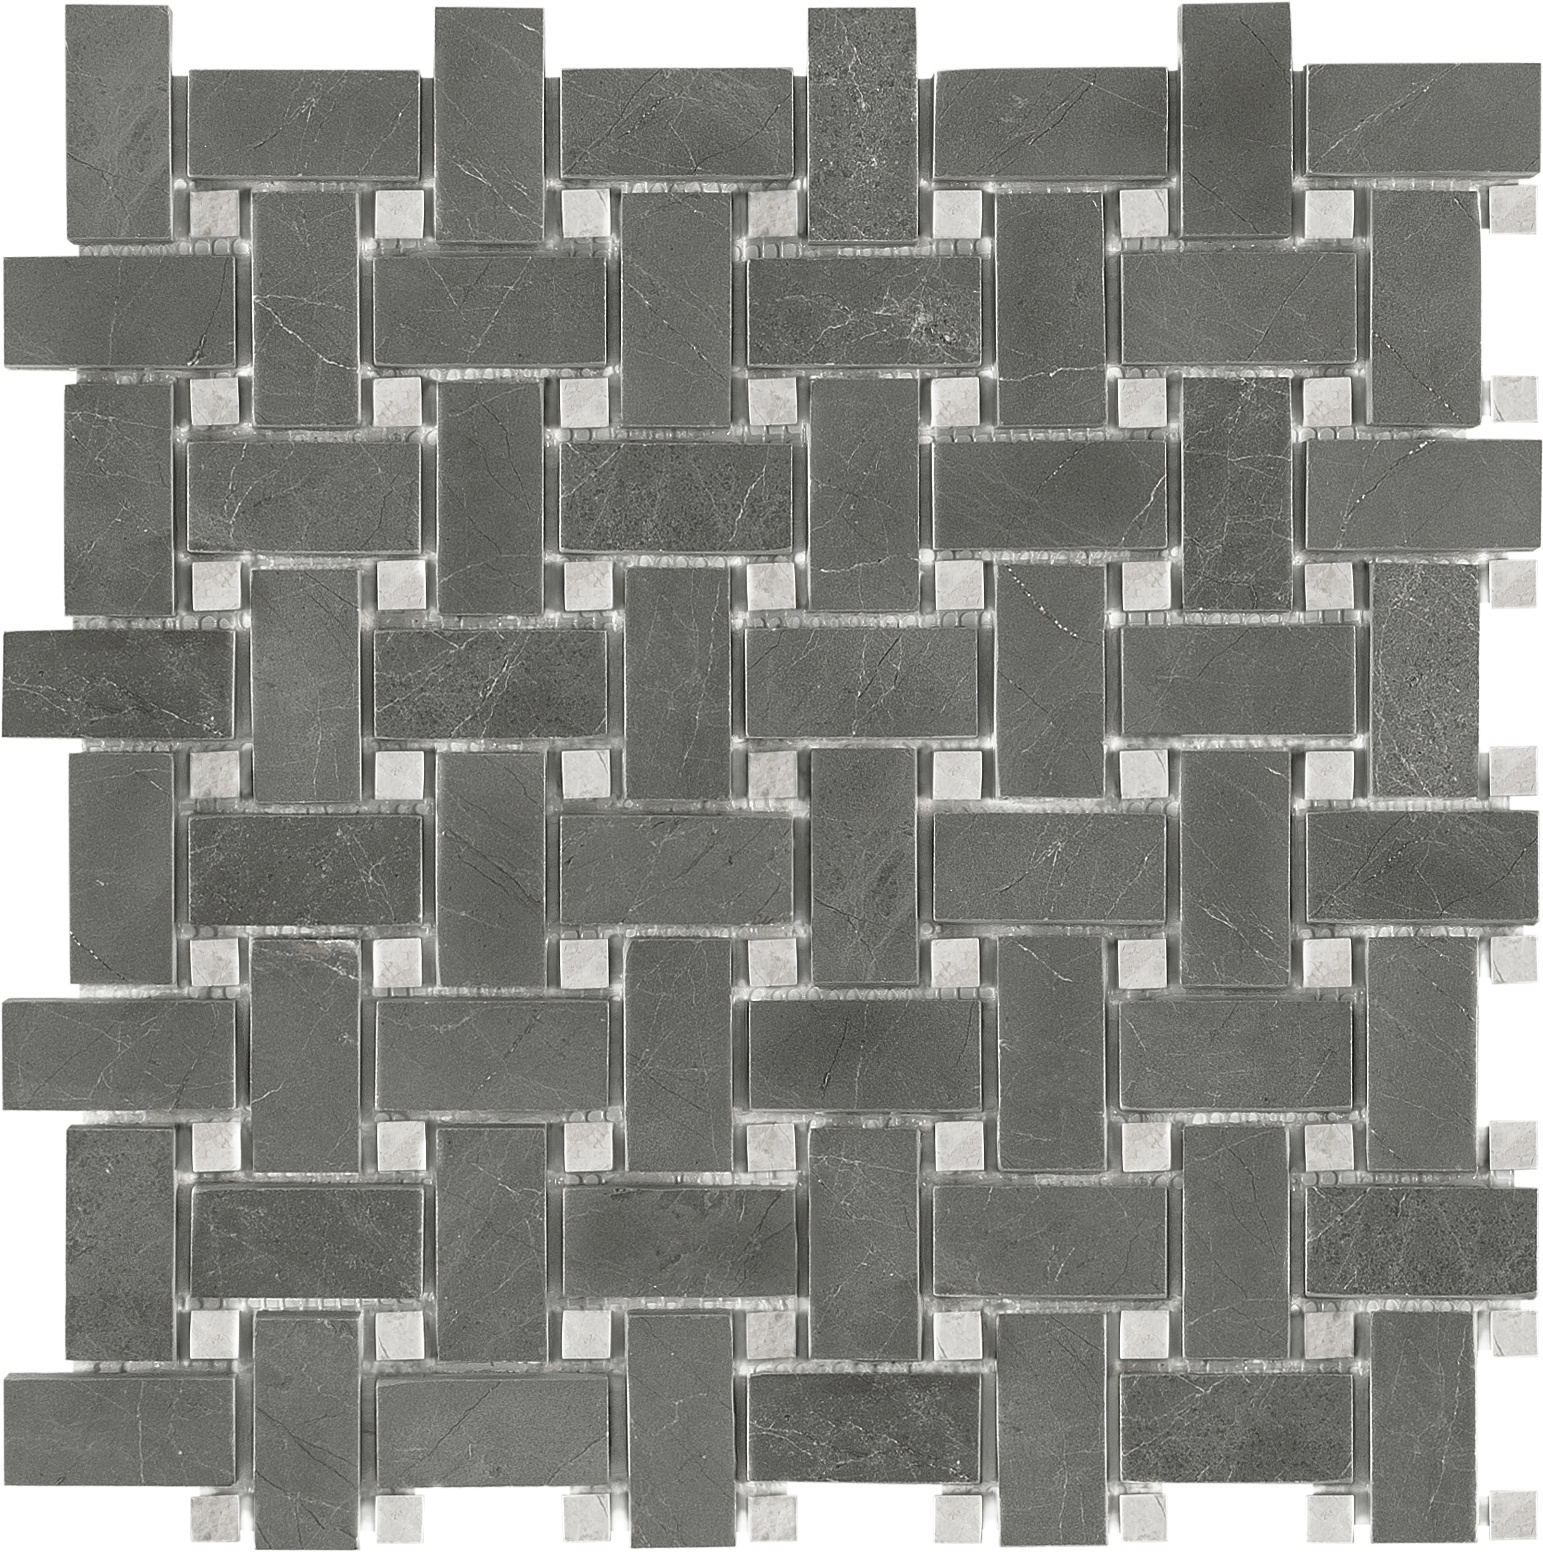 marble basketweave 2x2-inch pattern natural stone mosaic from stark carbon anatolia collection distributed by surface group international polished finish straight edge edge mesh shape